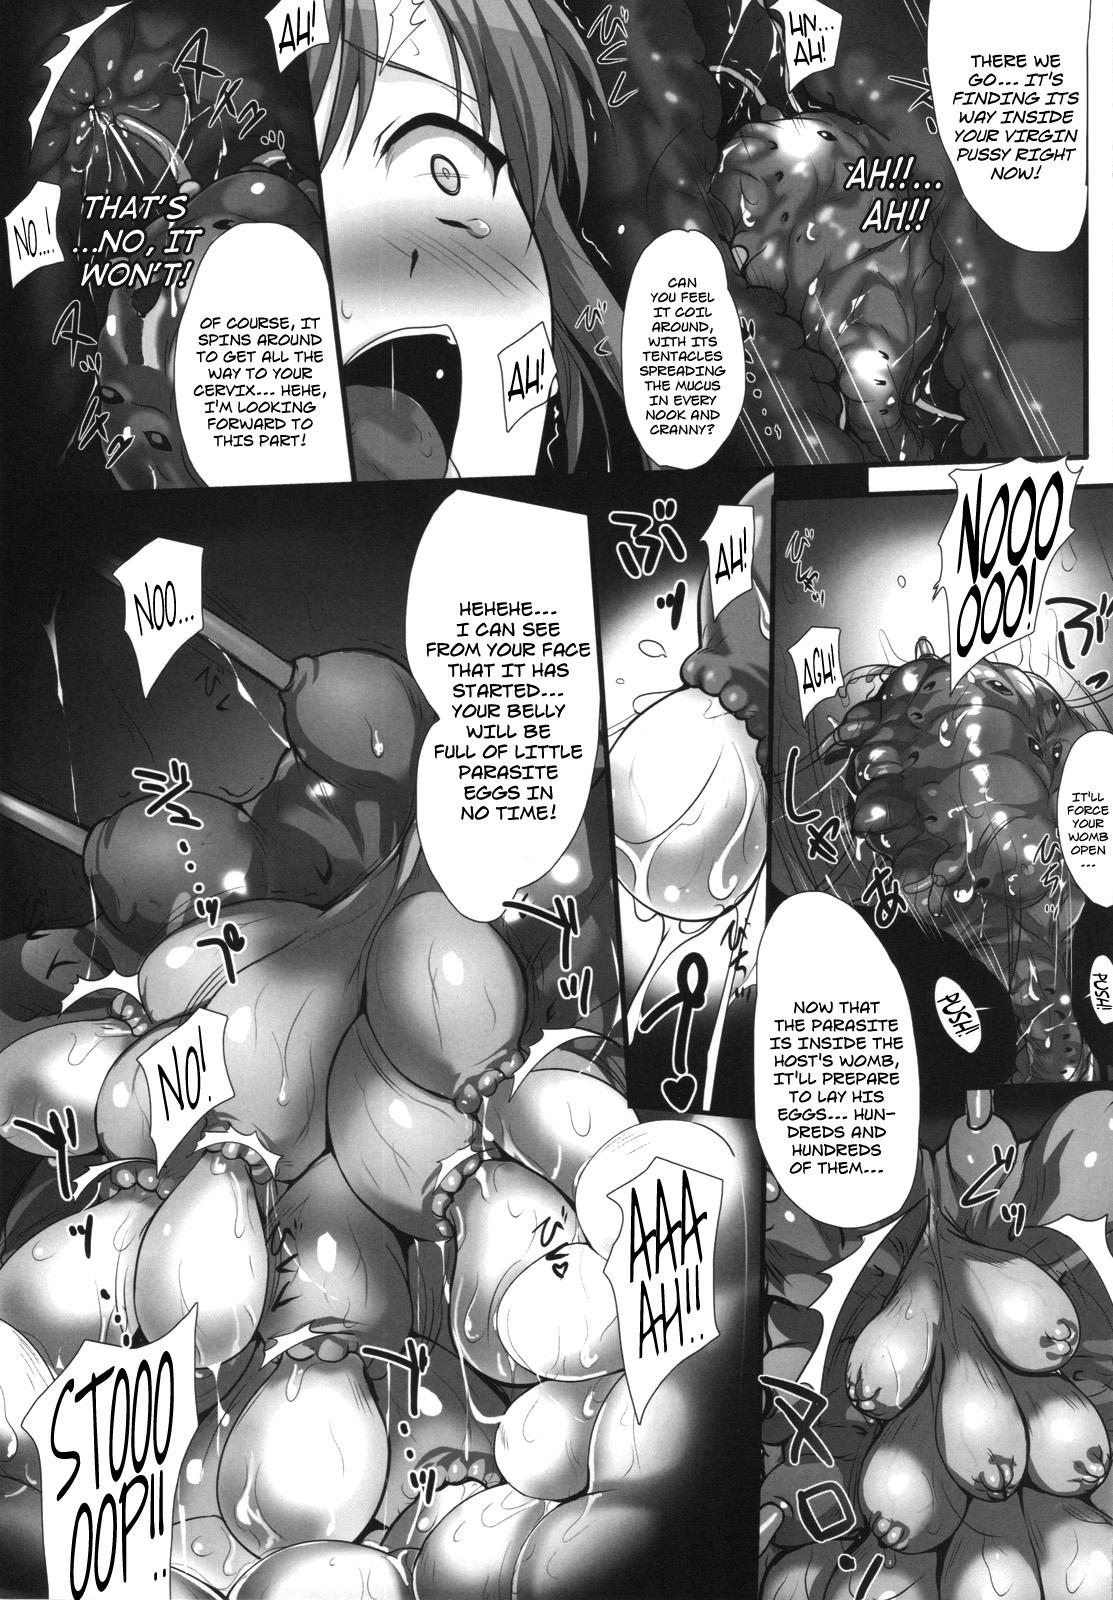 And PILEDGE CONCEPTION - Sword art online Free Fuck - Page 8